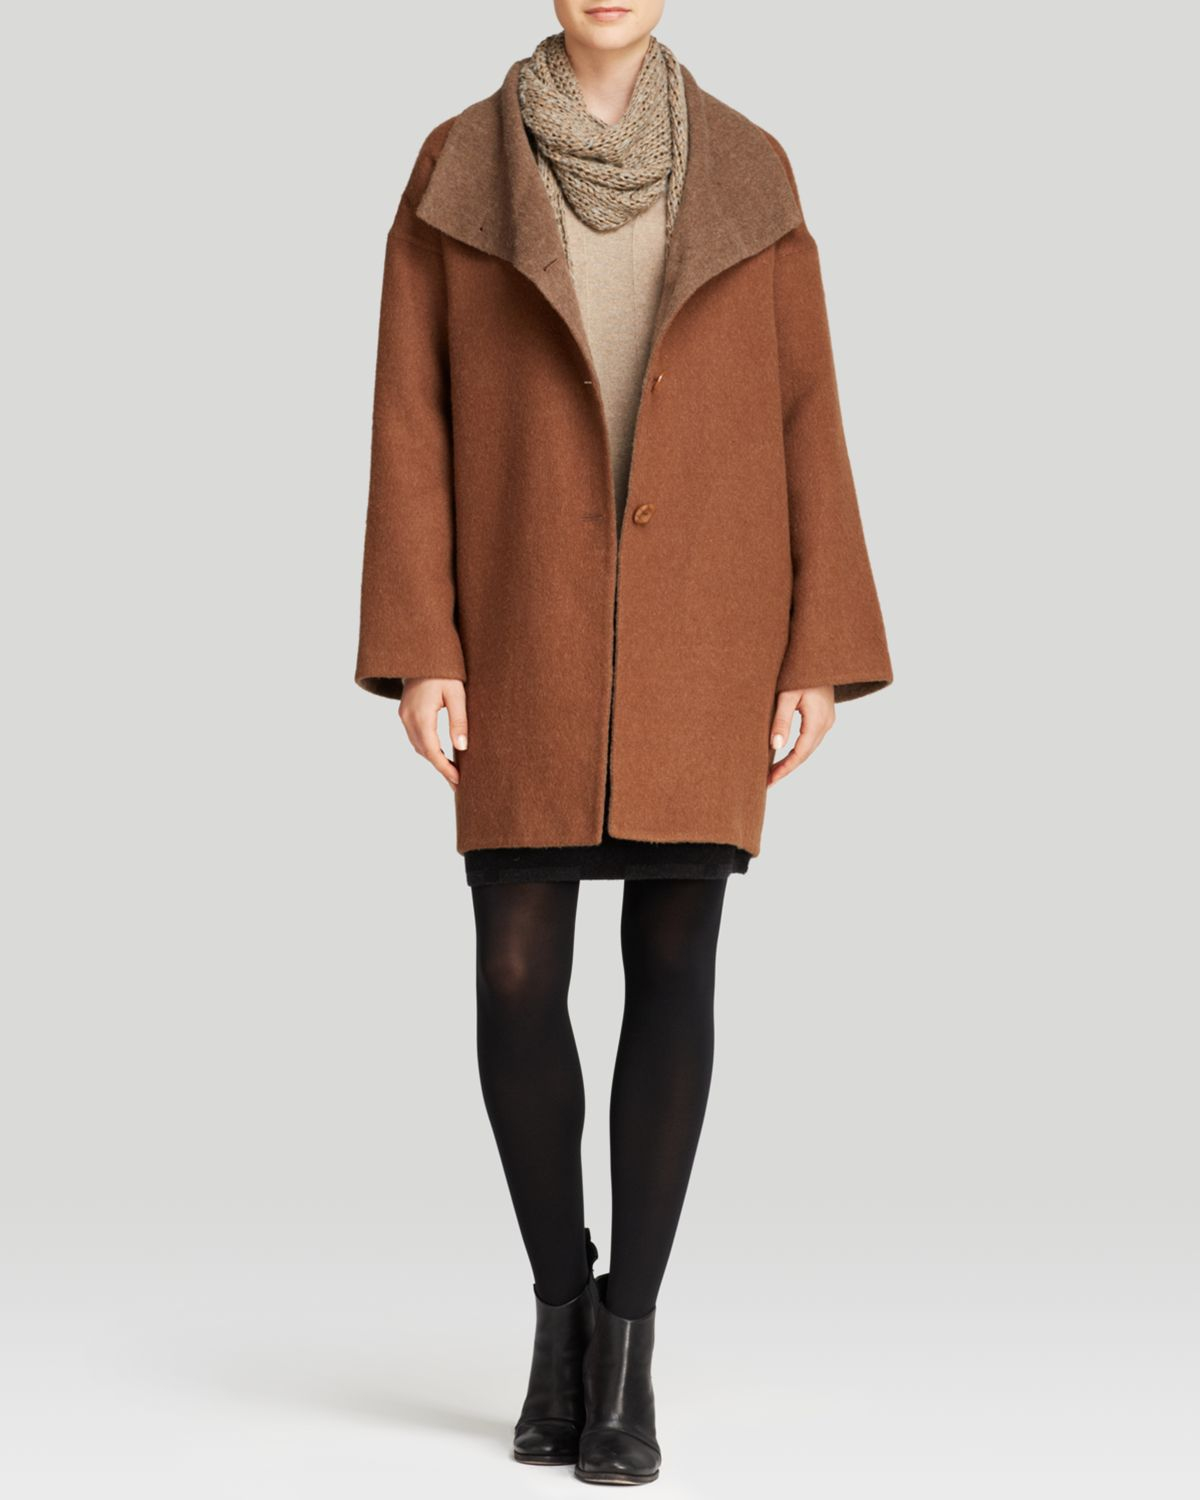 Lyst - Eileen Fisher Double Face Cocoon Coat in Brown